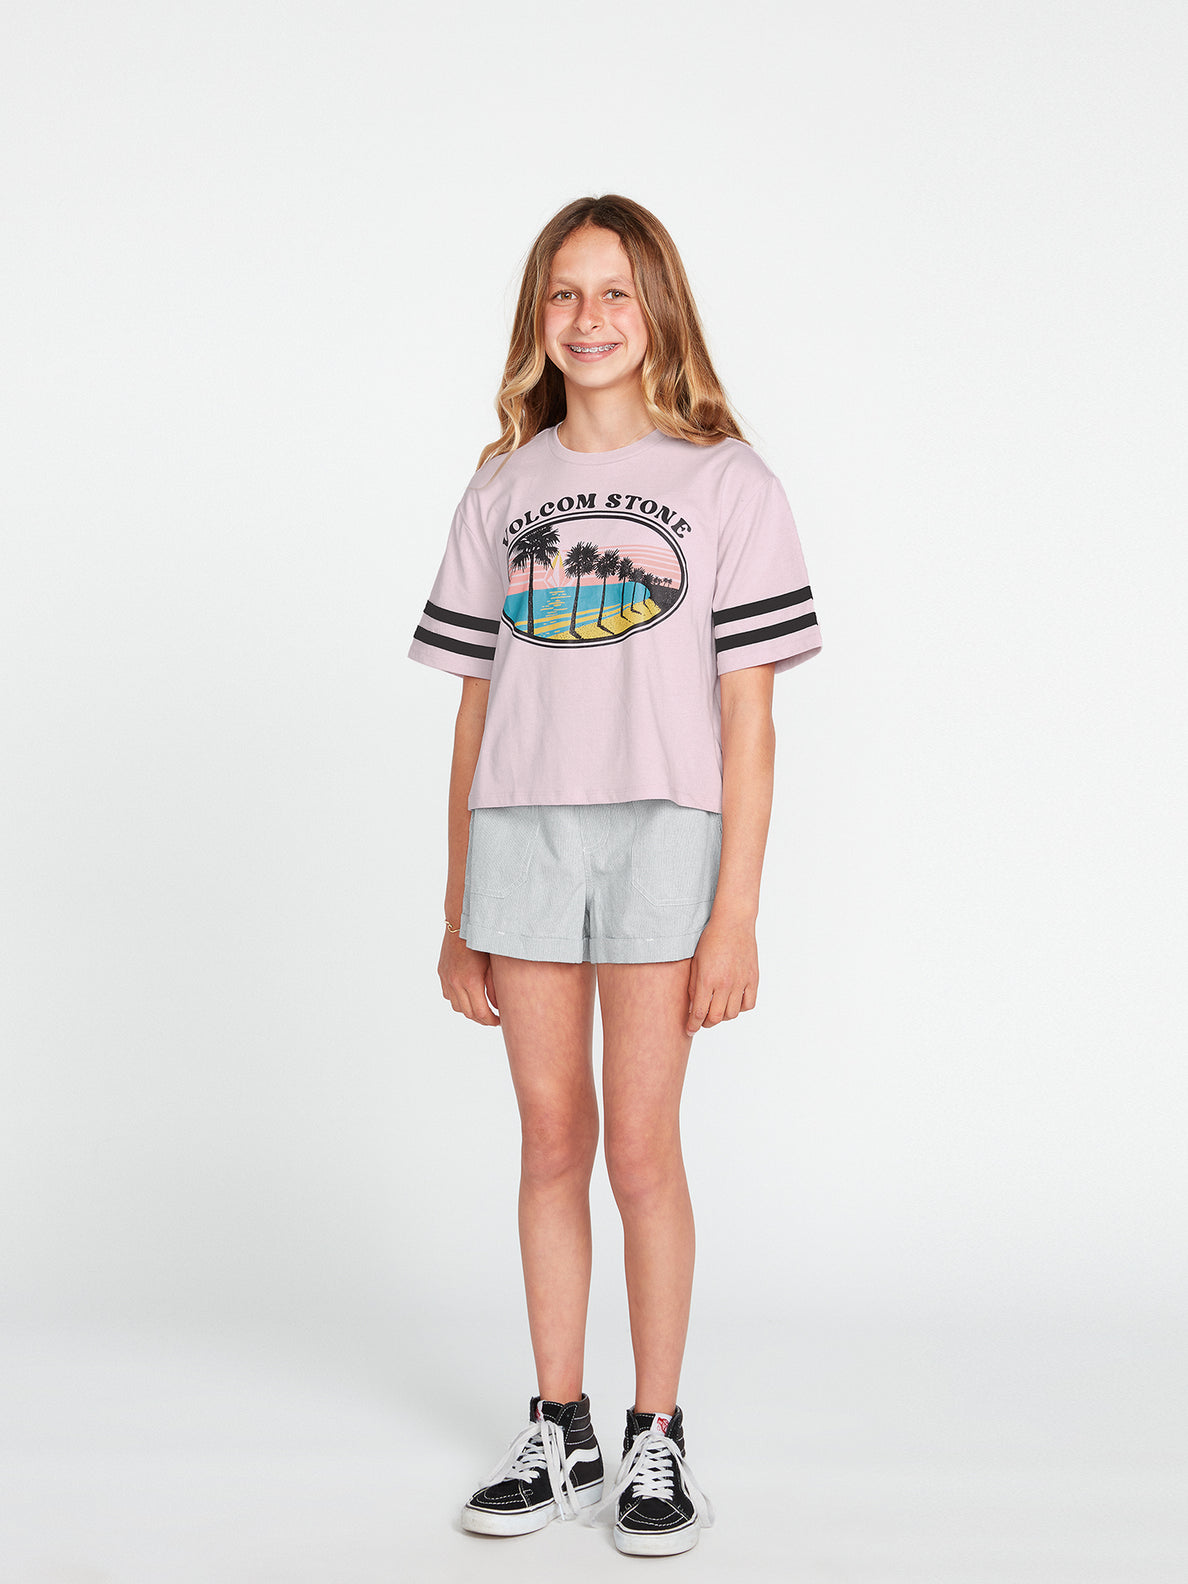 Girls Truly Stoked Short Sleeve Tee - Lavender (R3532201_LAV) [3]